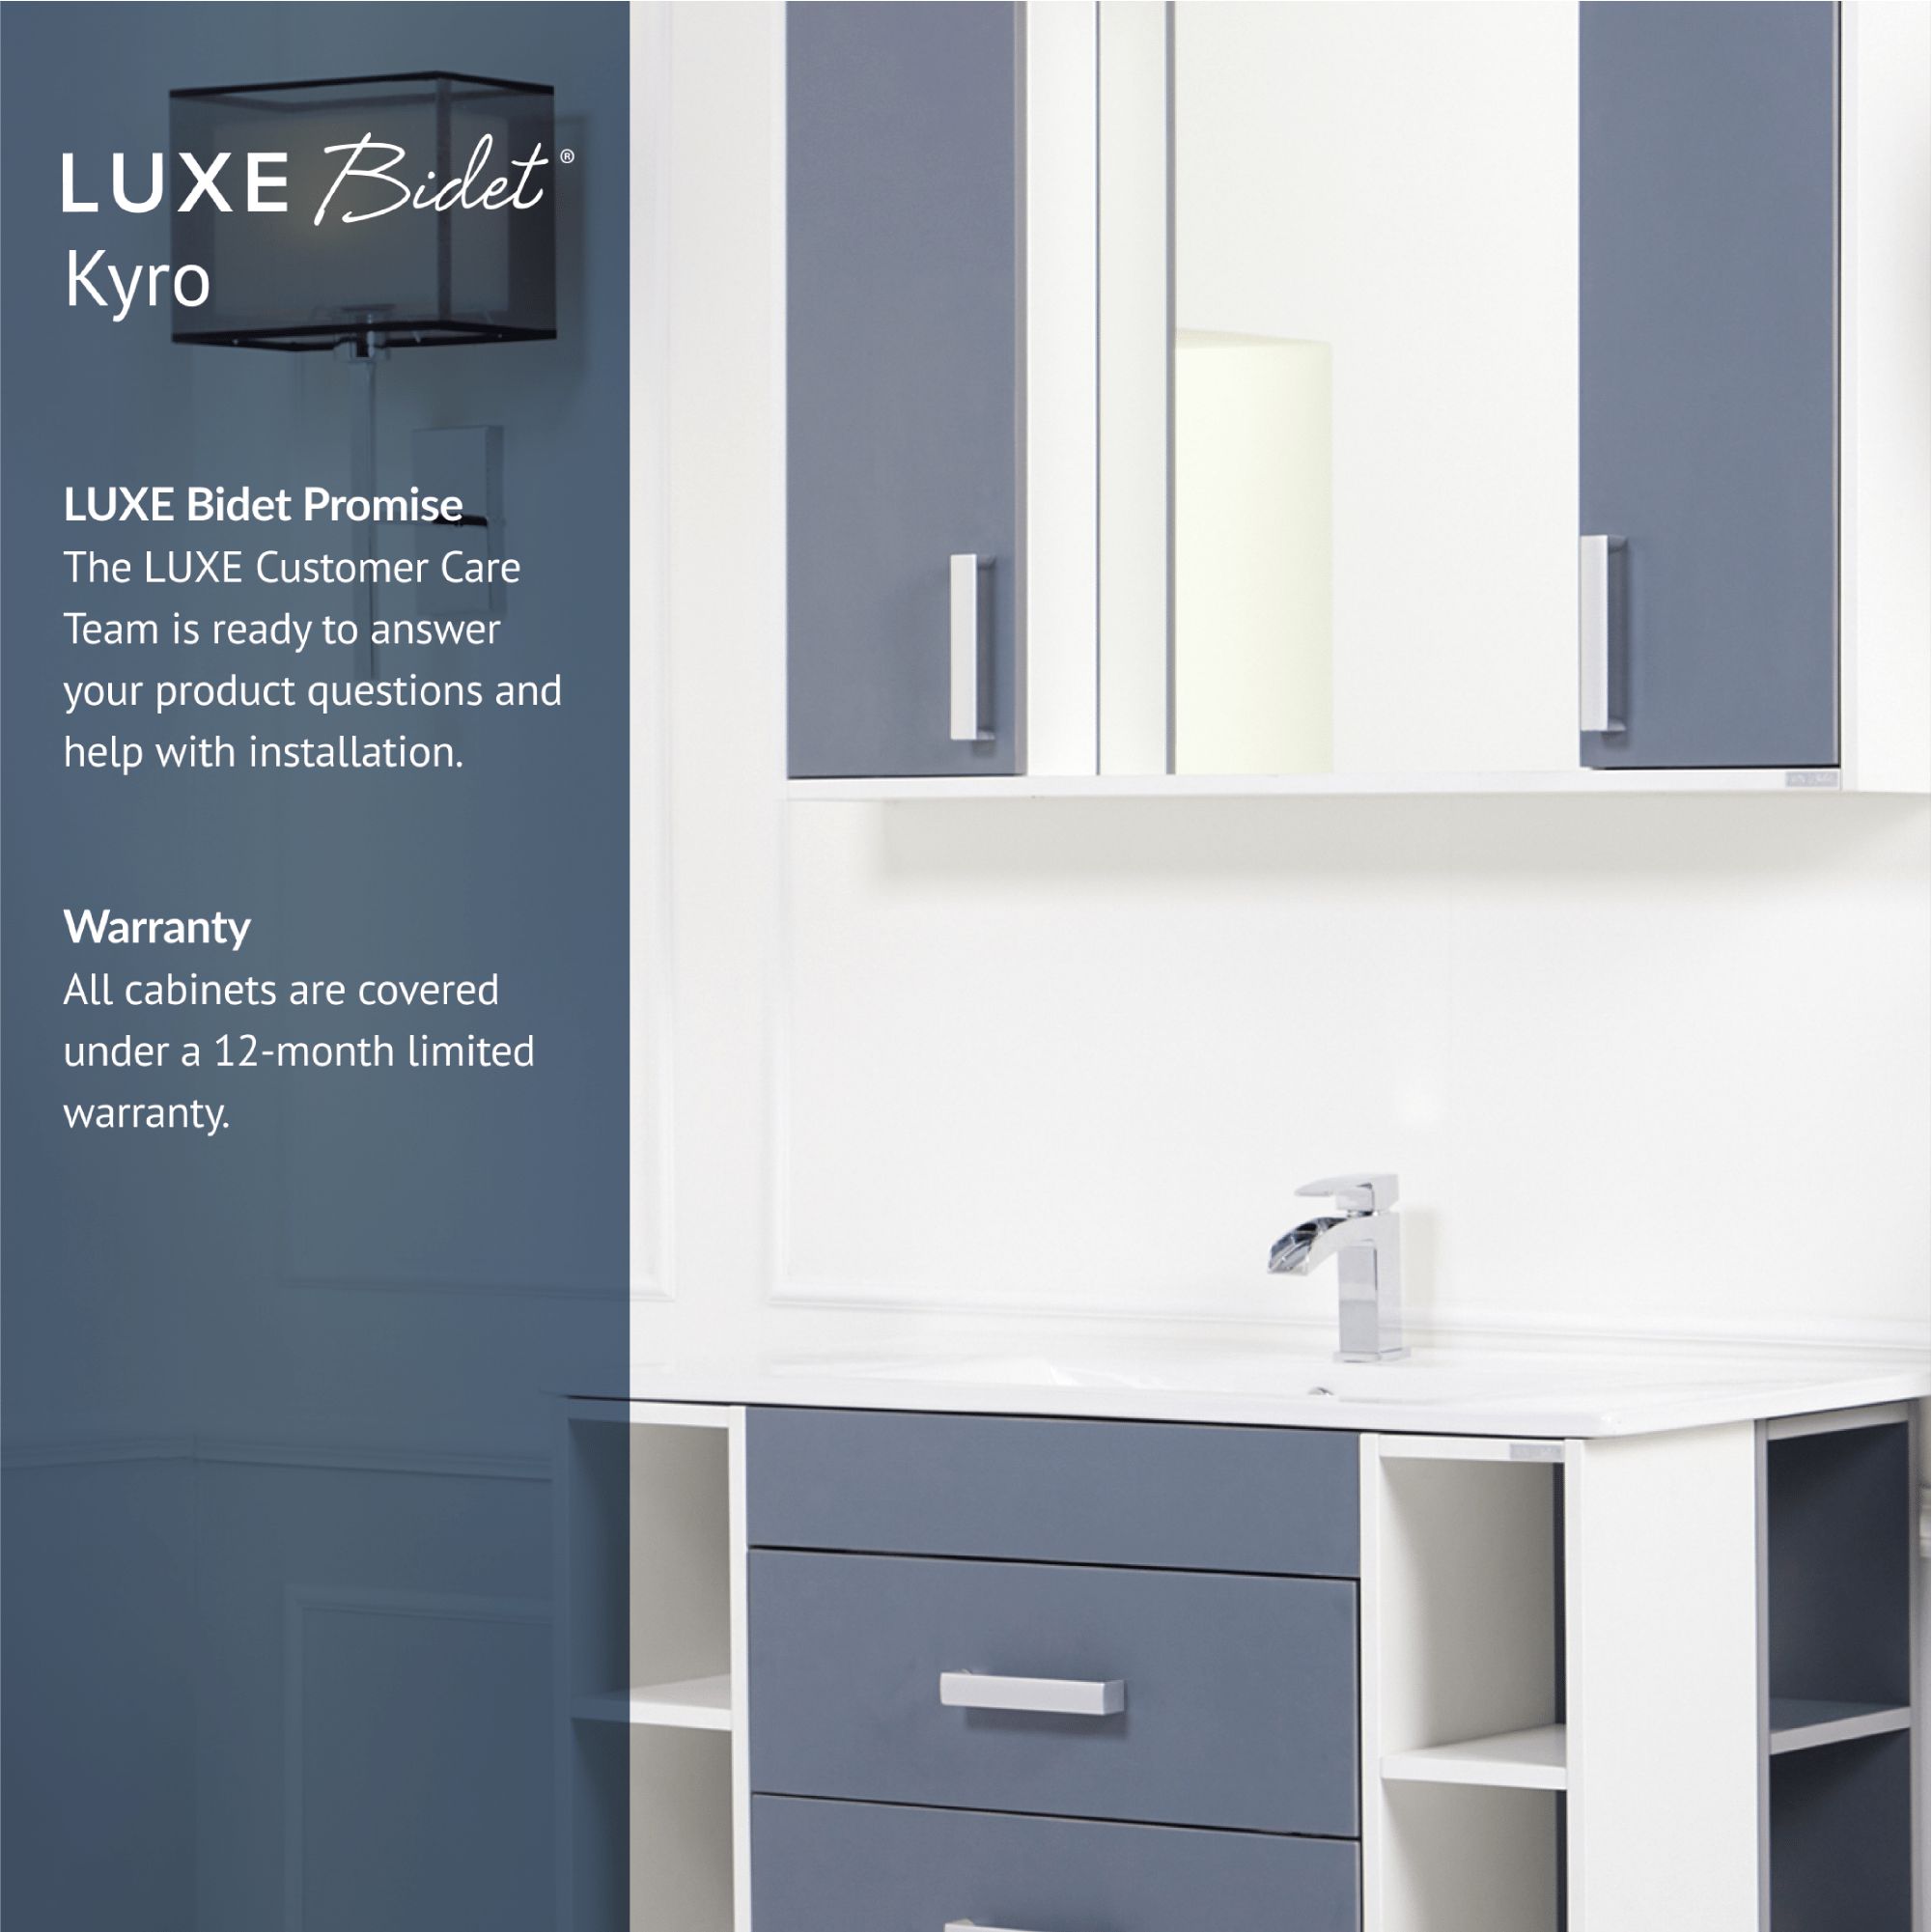 Kyro Bathroom Vanity Set is backed by the LUXE Bidet Promise and comes with a 12-month limited warranty.